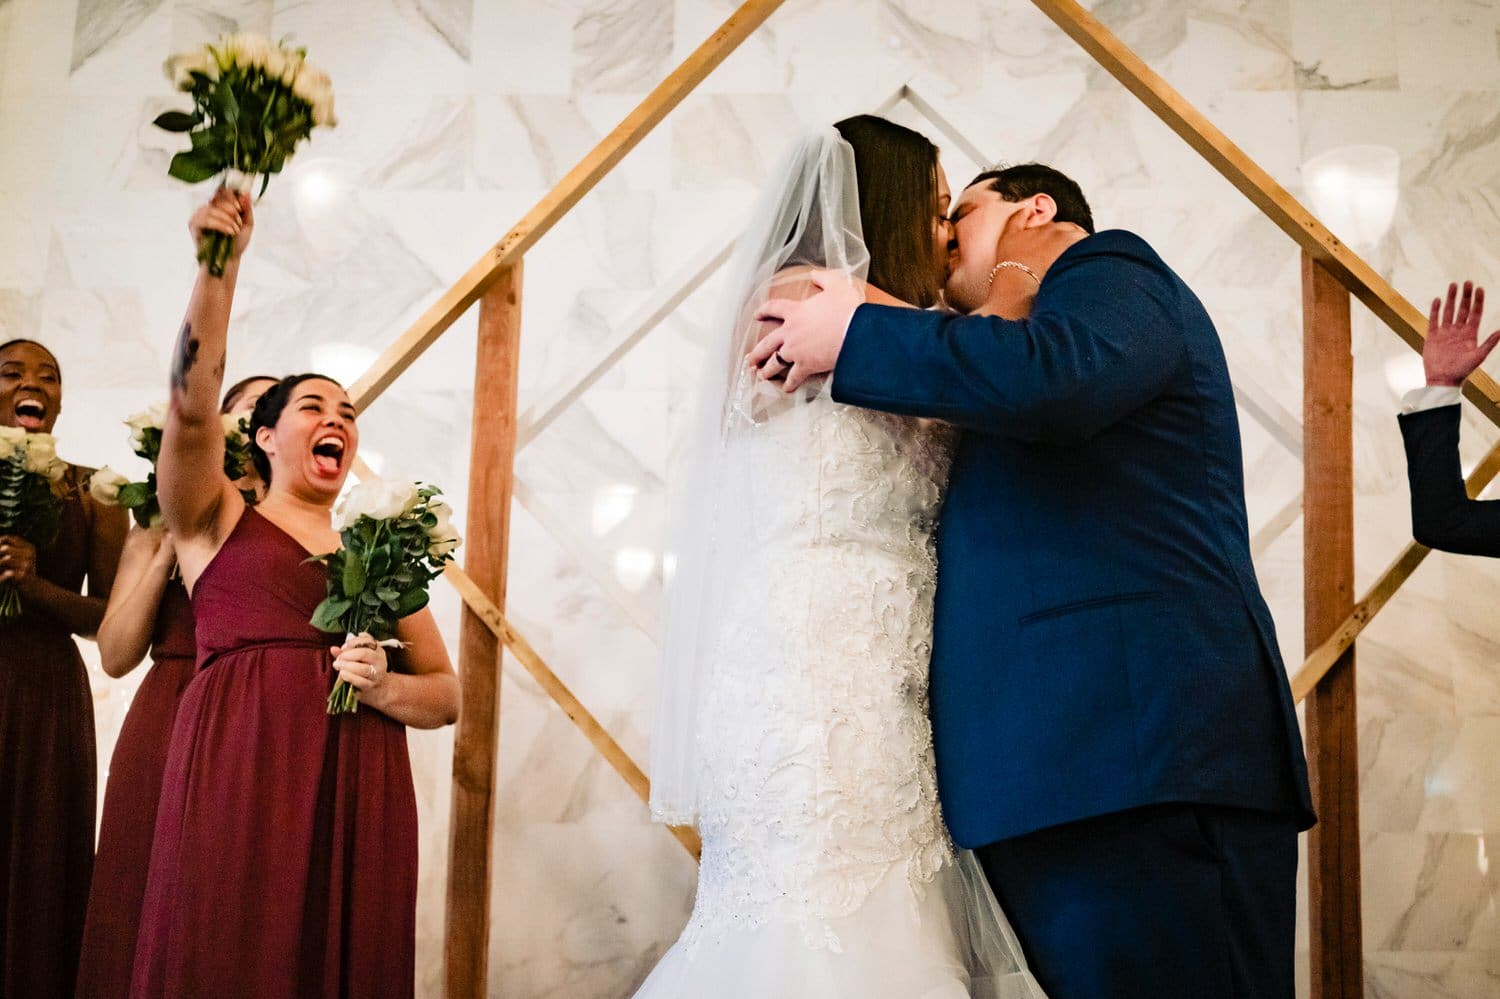 A colorful, candid picture of a bride and groom sharing their first kiss as the maid of honor throws her arms up in celebration at the end of a winter wedding ceremony in Kansas City at The Station. 